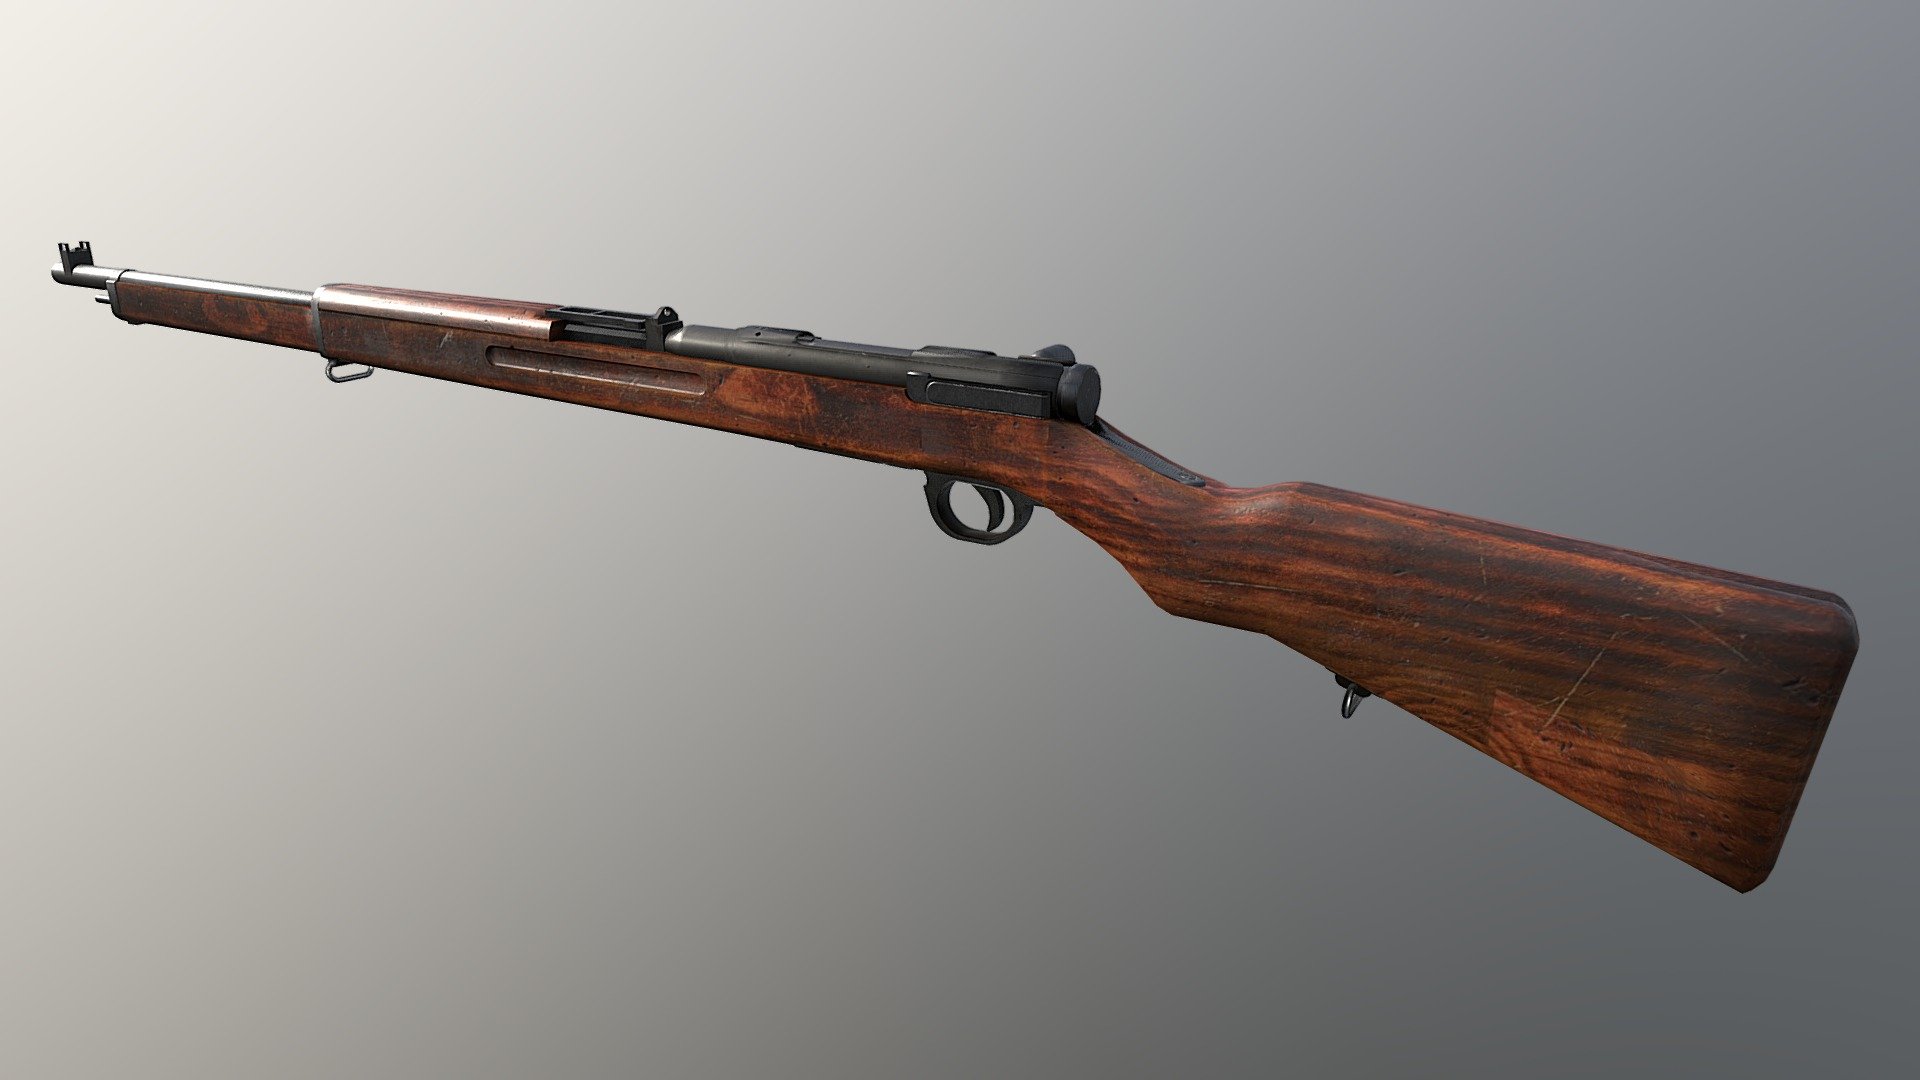 A Type 38 arisaka rifle used in WW1 and 2 by the japanese and other countries back in WW1.

I updated this rifle with a proper better texture and added more details of the model.

And it is free download.

Make sure you will credit me! Thanks! - Type 38 Arisaka rifle - Download Free 3D model by Snijboer 3d model